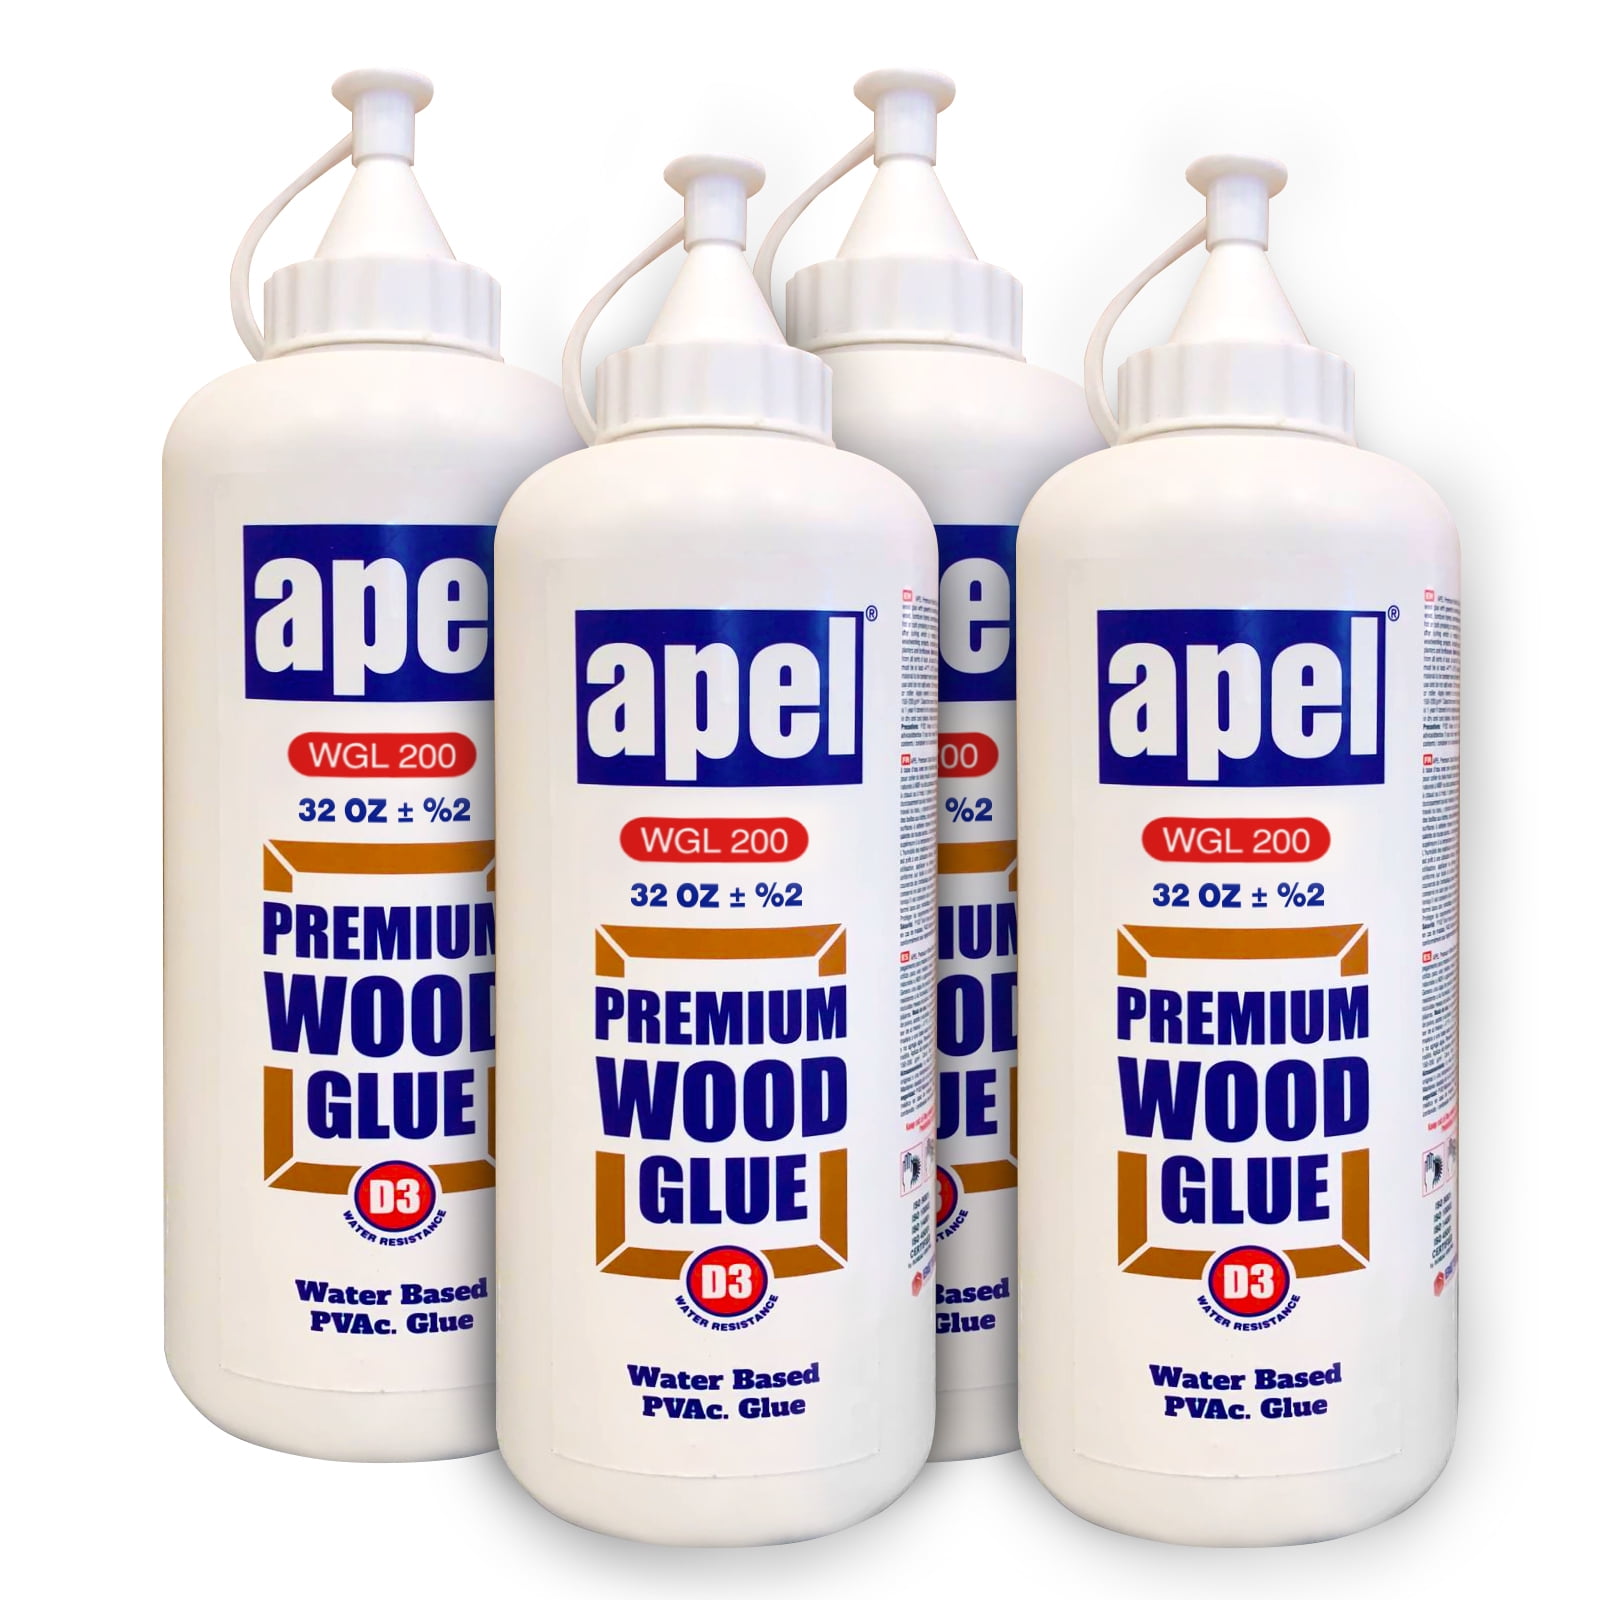 Wood Glue For Woodworking And Hobbies, Extra Strength For Crafts, 16 oz./1  pound, Water Based Clear PVA Glue For Interior & Exterior, Low Viscosity (2  Pack) 